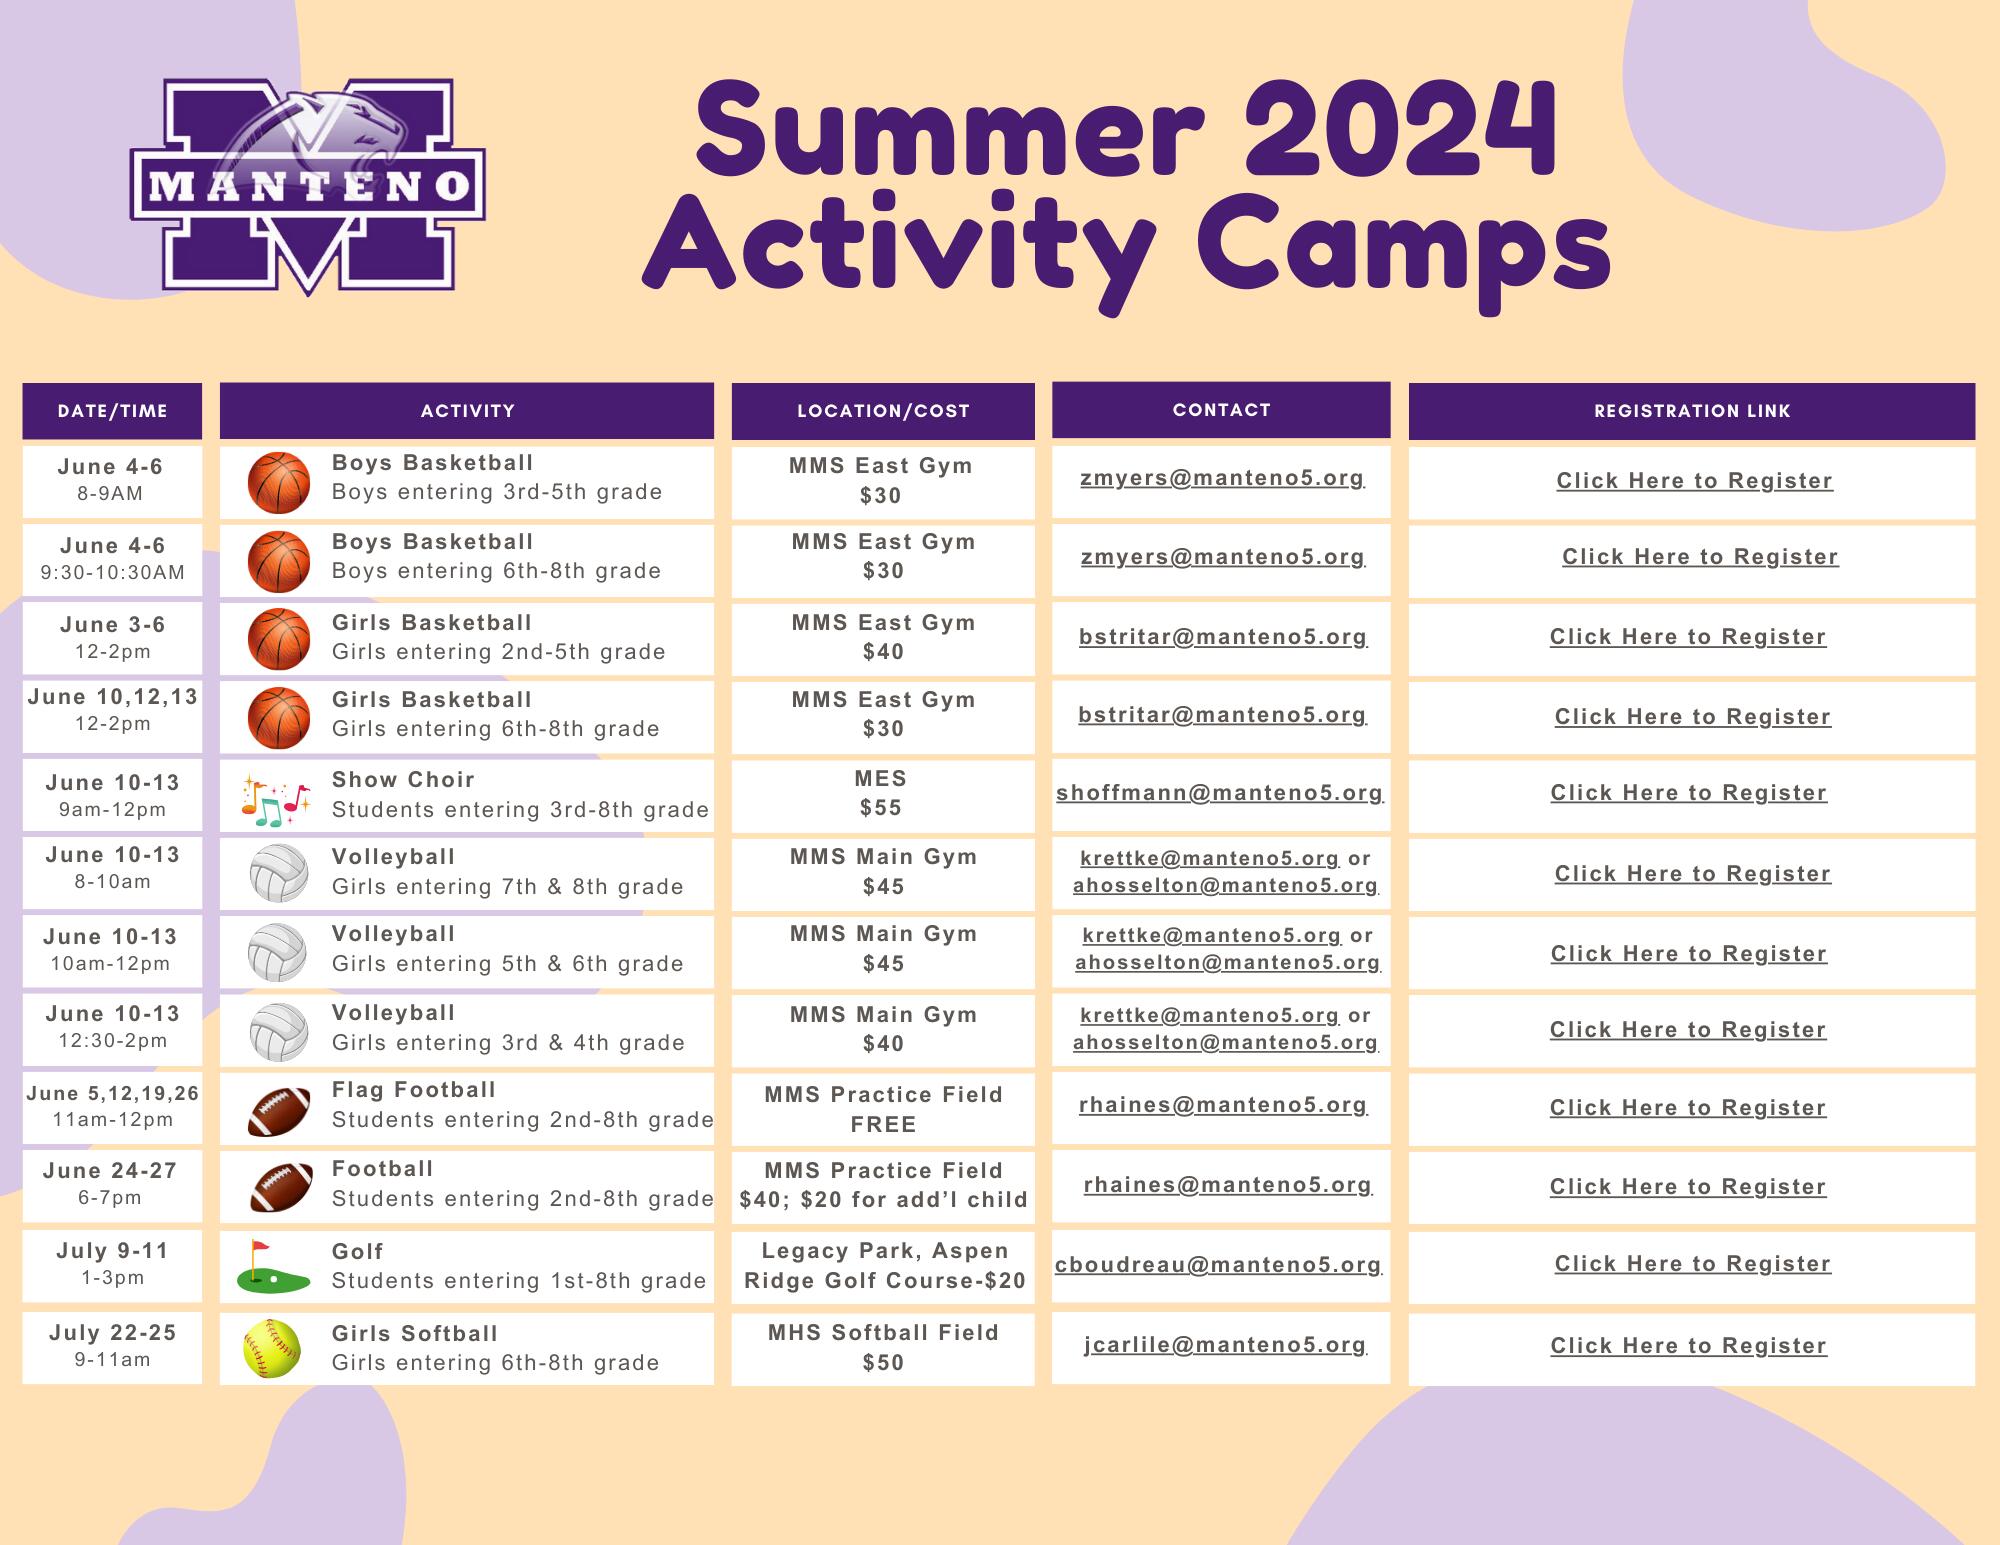 Summer 2024 Activity Camps